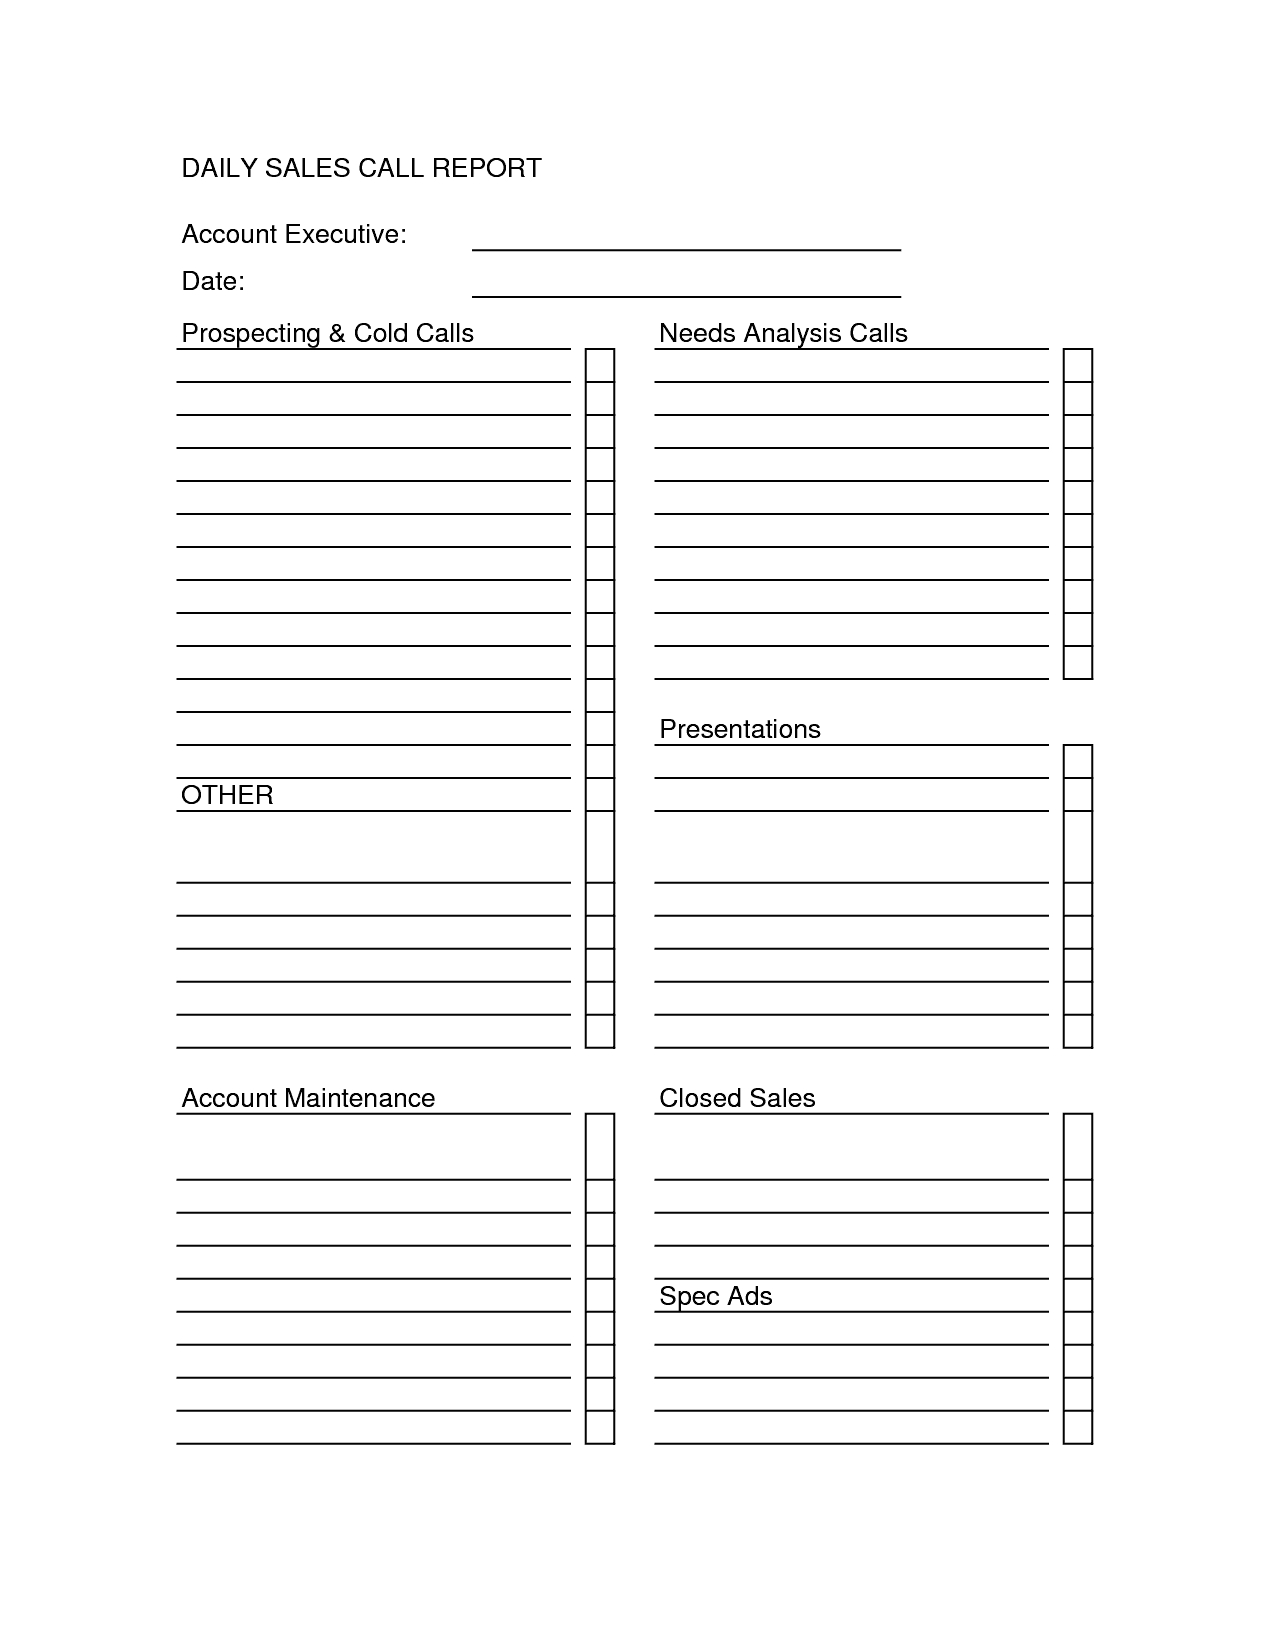 Sales Call Report Templates - Word Excel Fomats Intended For Sales Rep Call Report Template